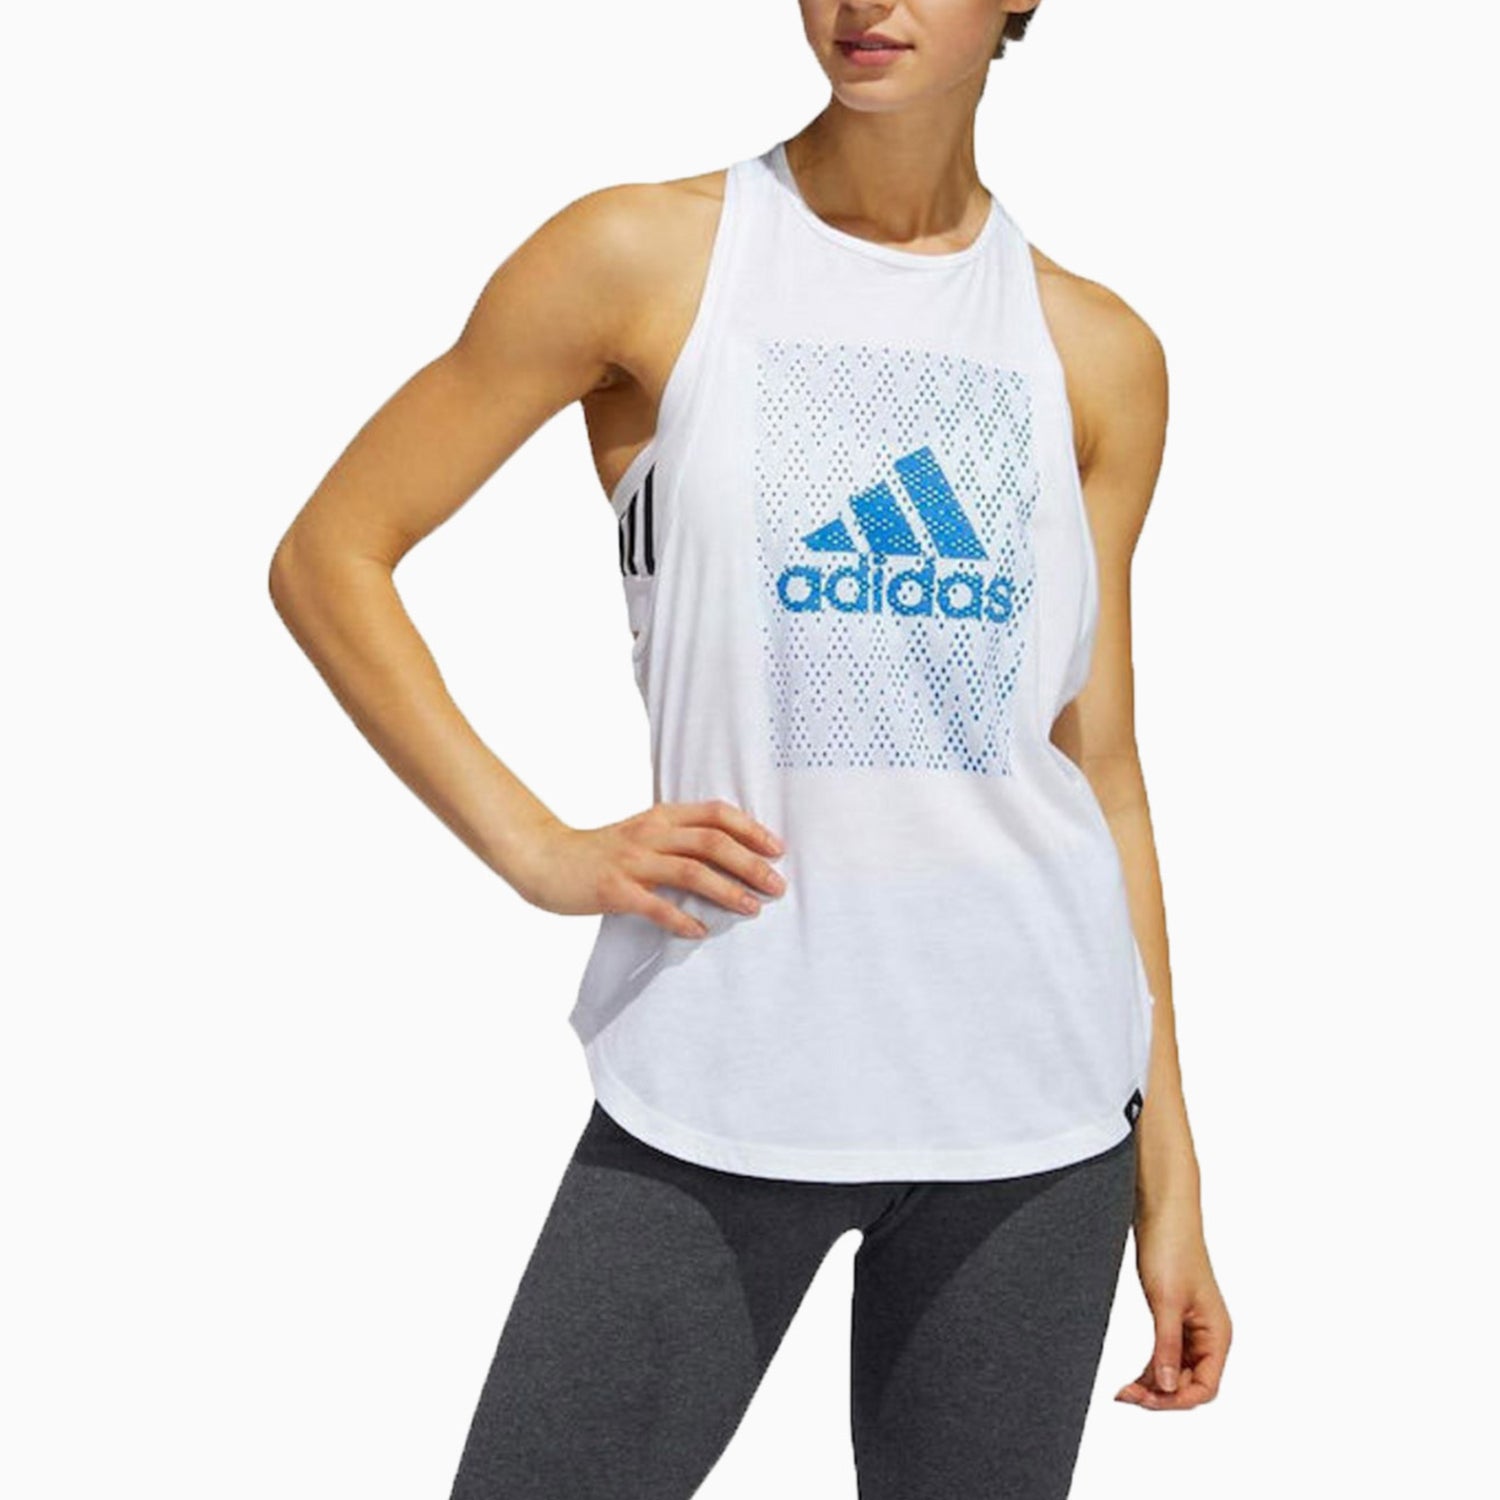 adidas-womens-badge-of-sport-graphic-sleeveless-sports-top-fq2326